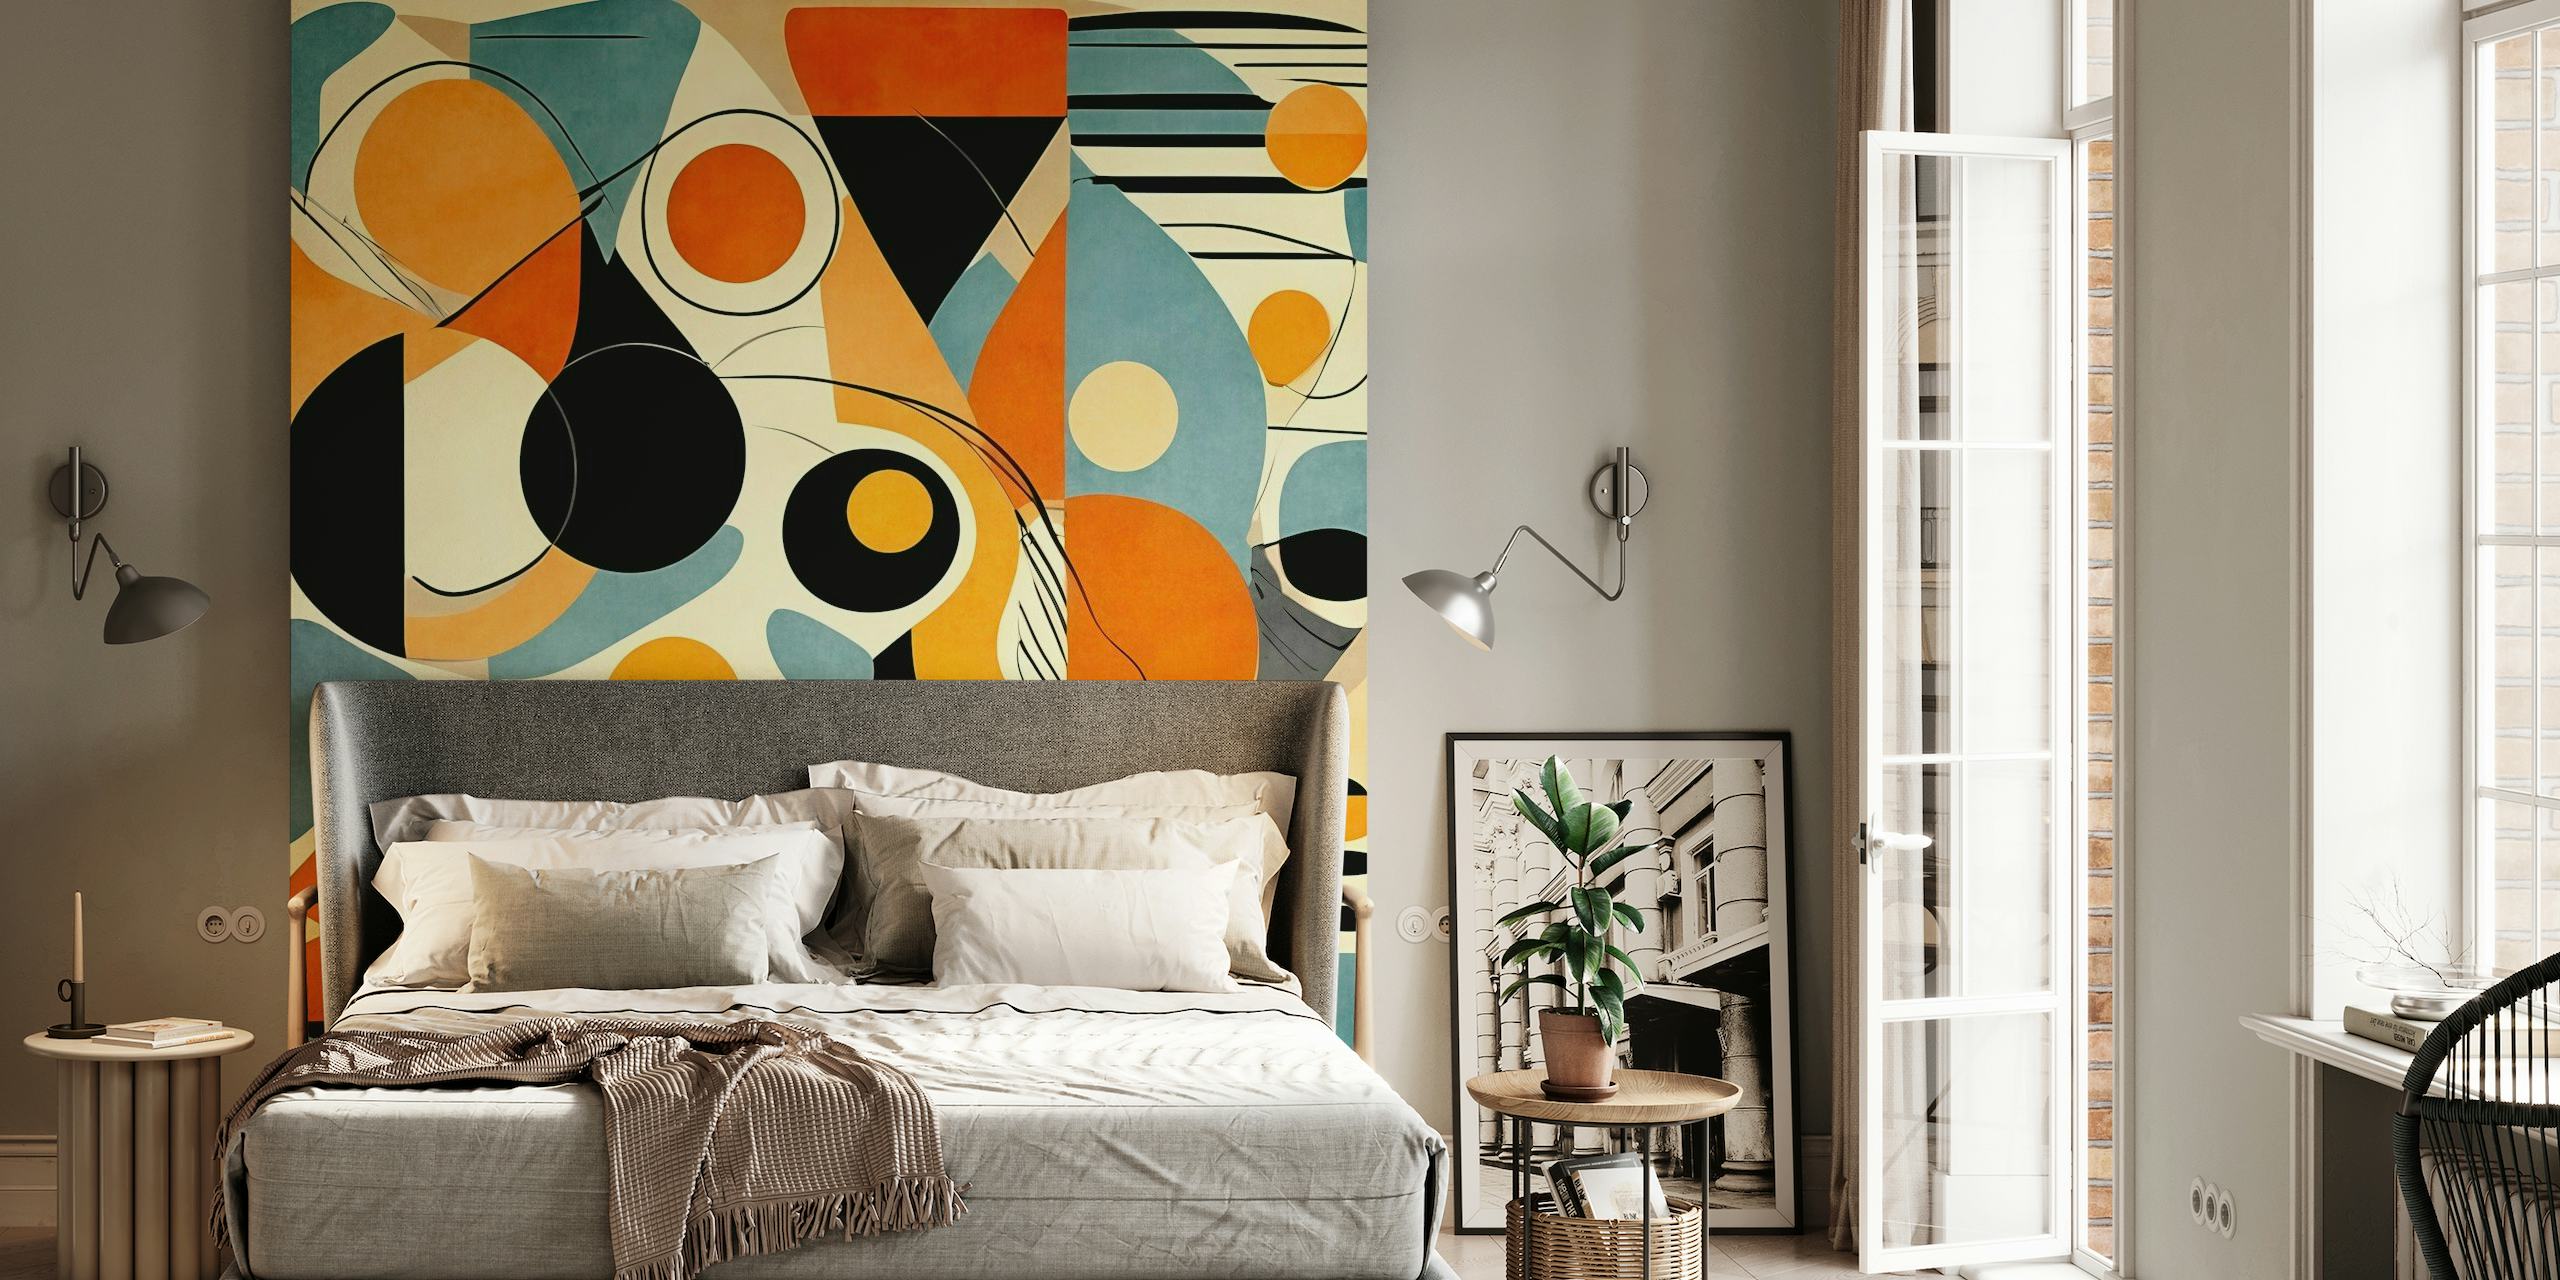 Abstract geometric wall mural with a mix of orange, blue, black, and cream colors